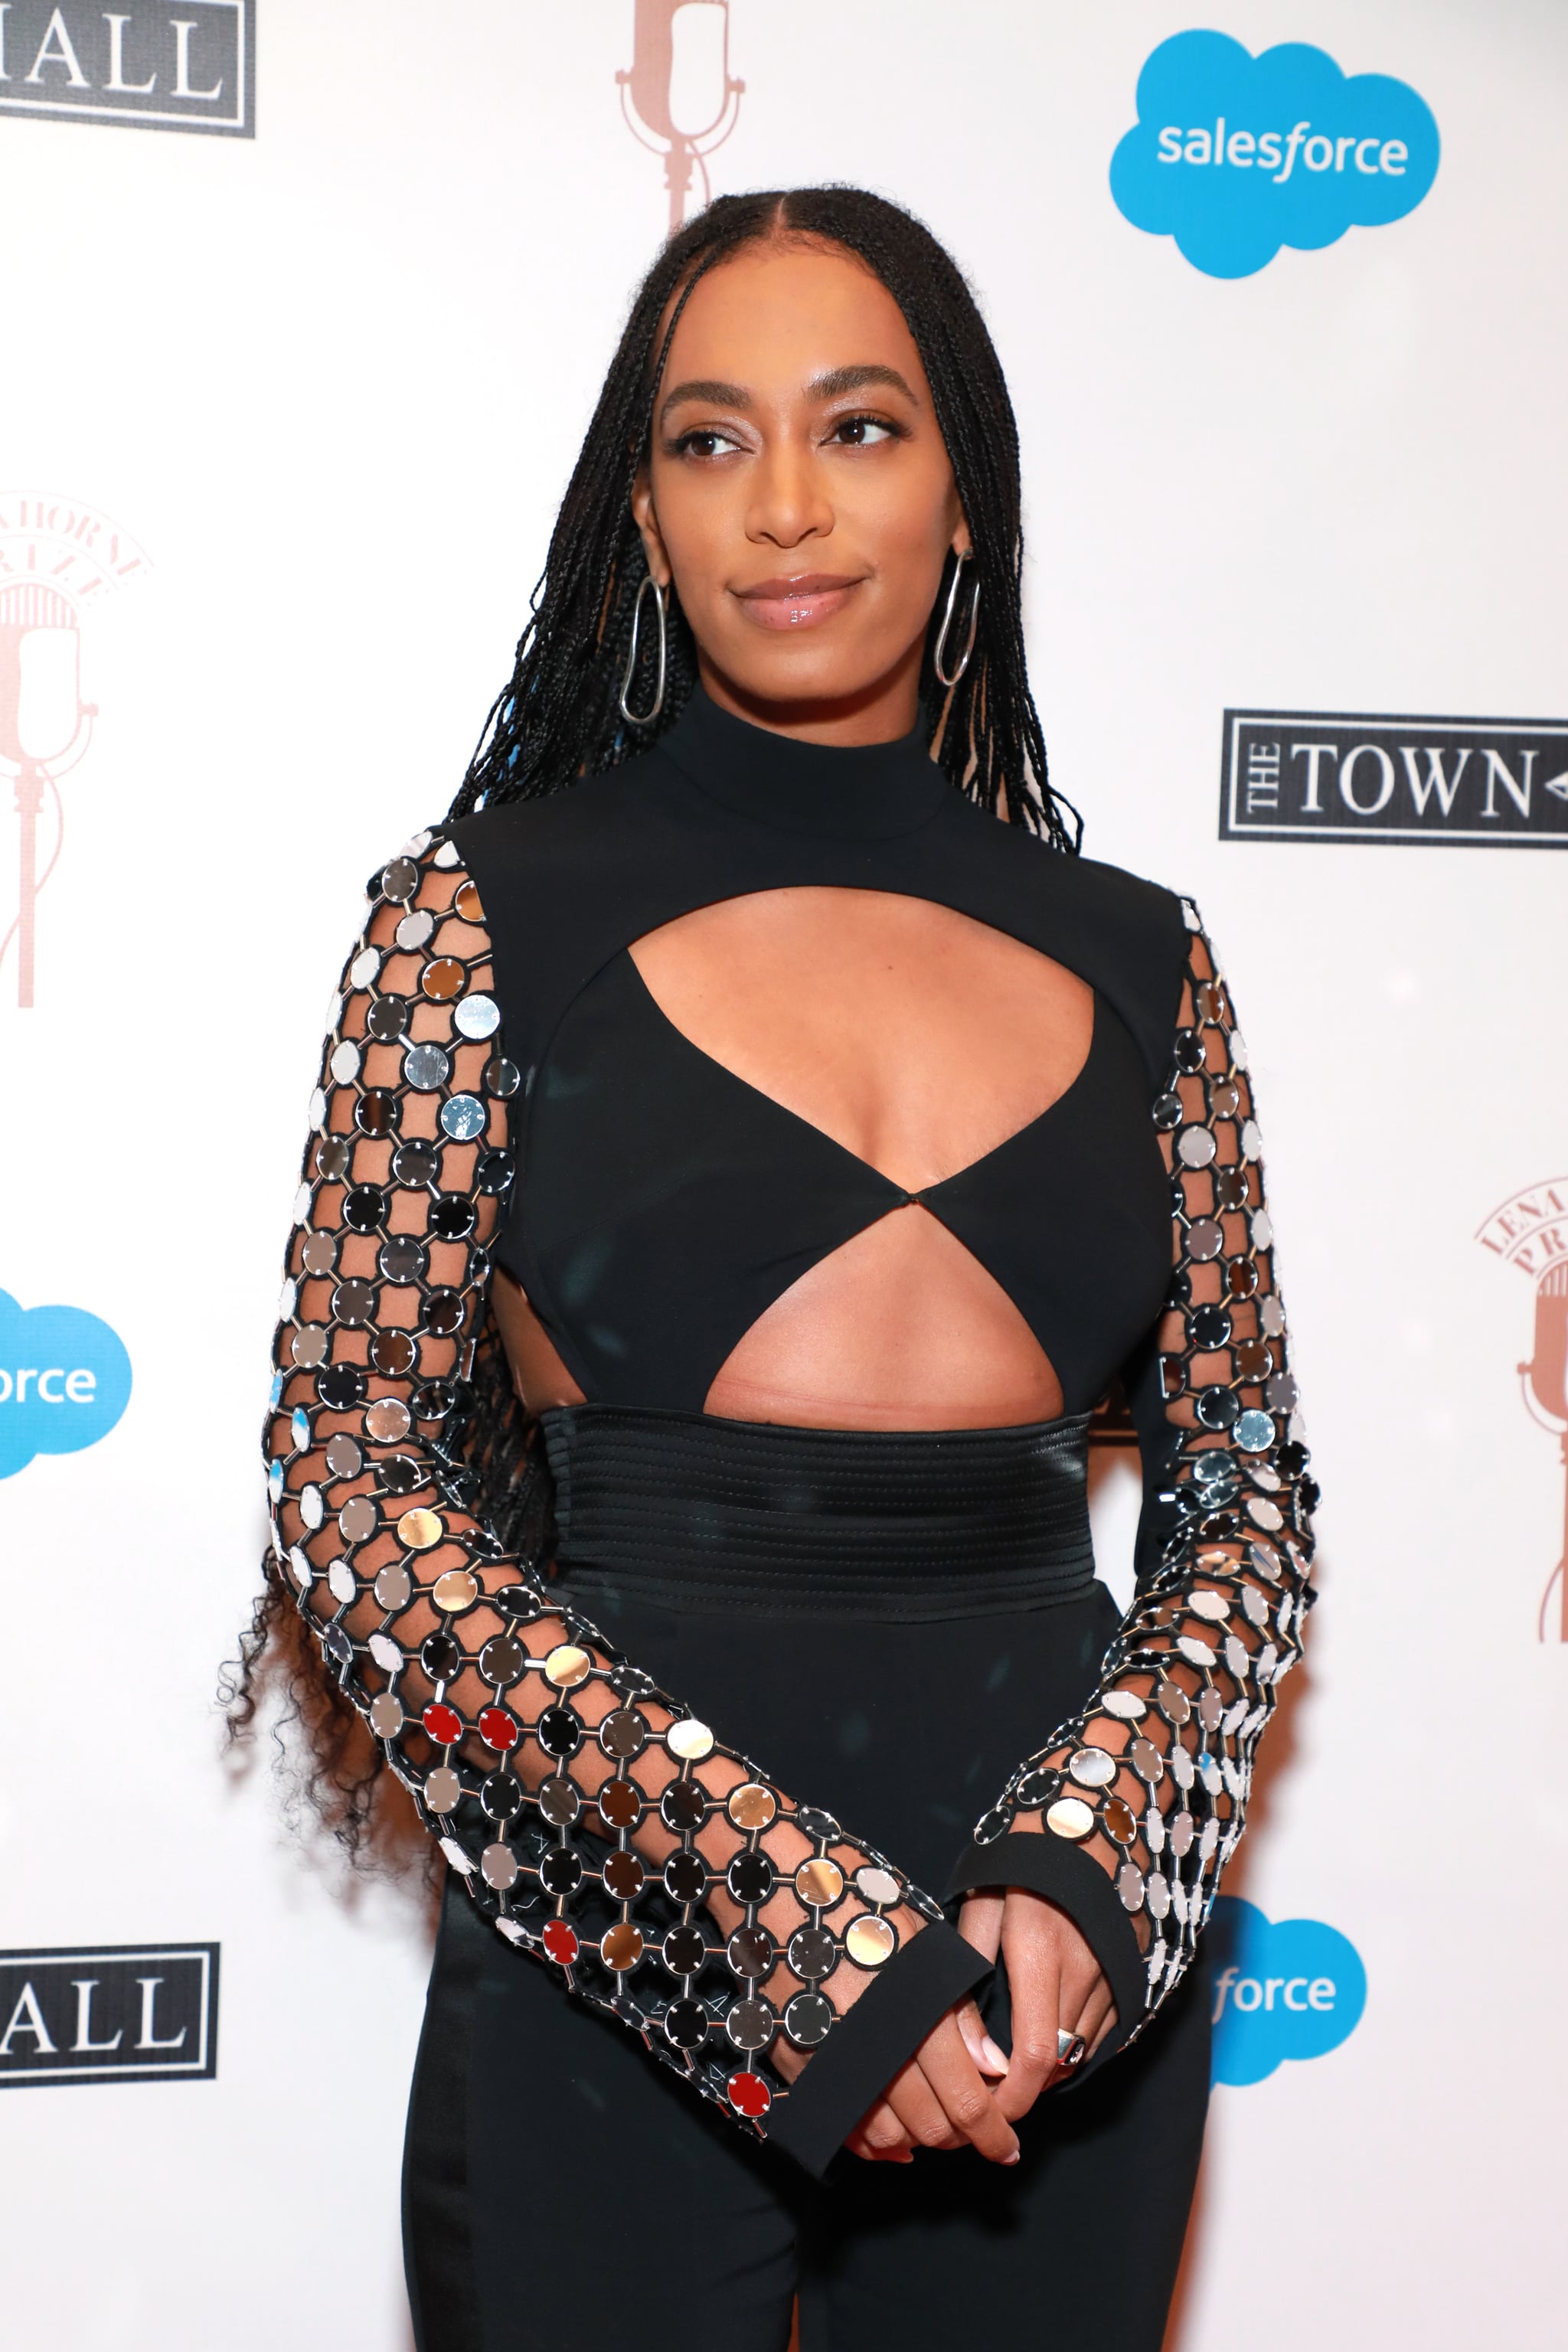 NEW YORK, NEW YORK - FEBRUARY 28: Solange Knowles attends the Lena Horne Prize Event Honoring Solange Knowles Presented by Salesforce at the Town Hall on February 28, 2020 in New York City. (Photo by Jason Mendez/Getty Images for The Town Hall)